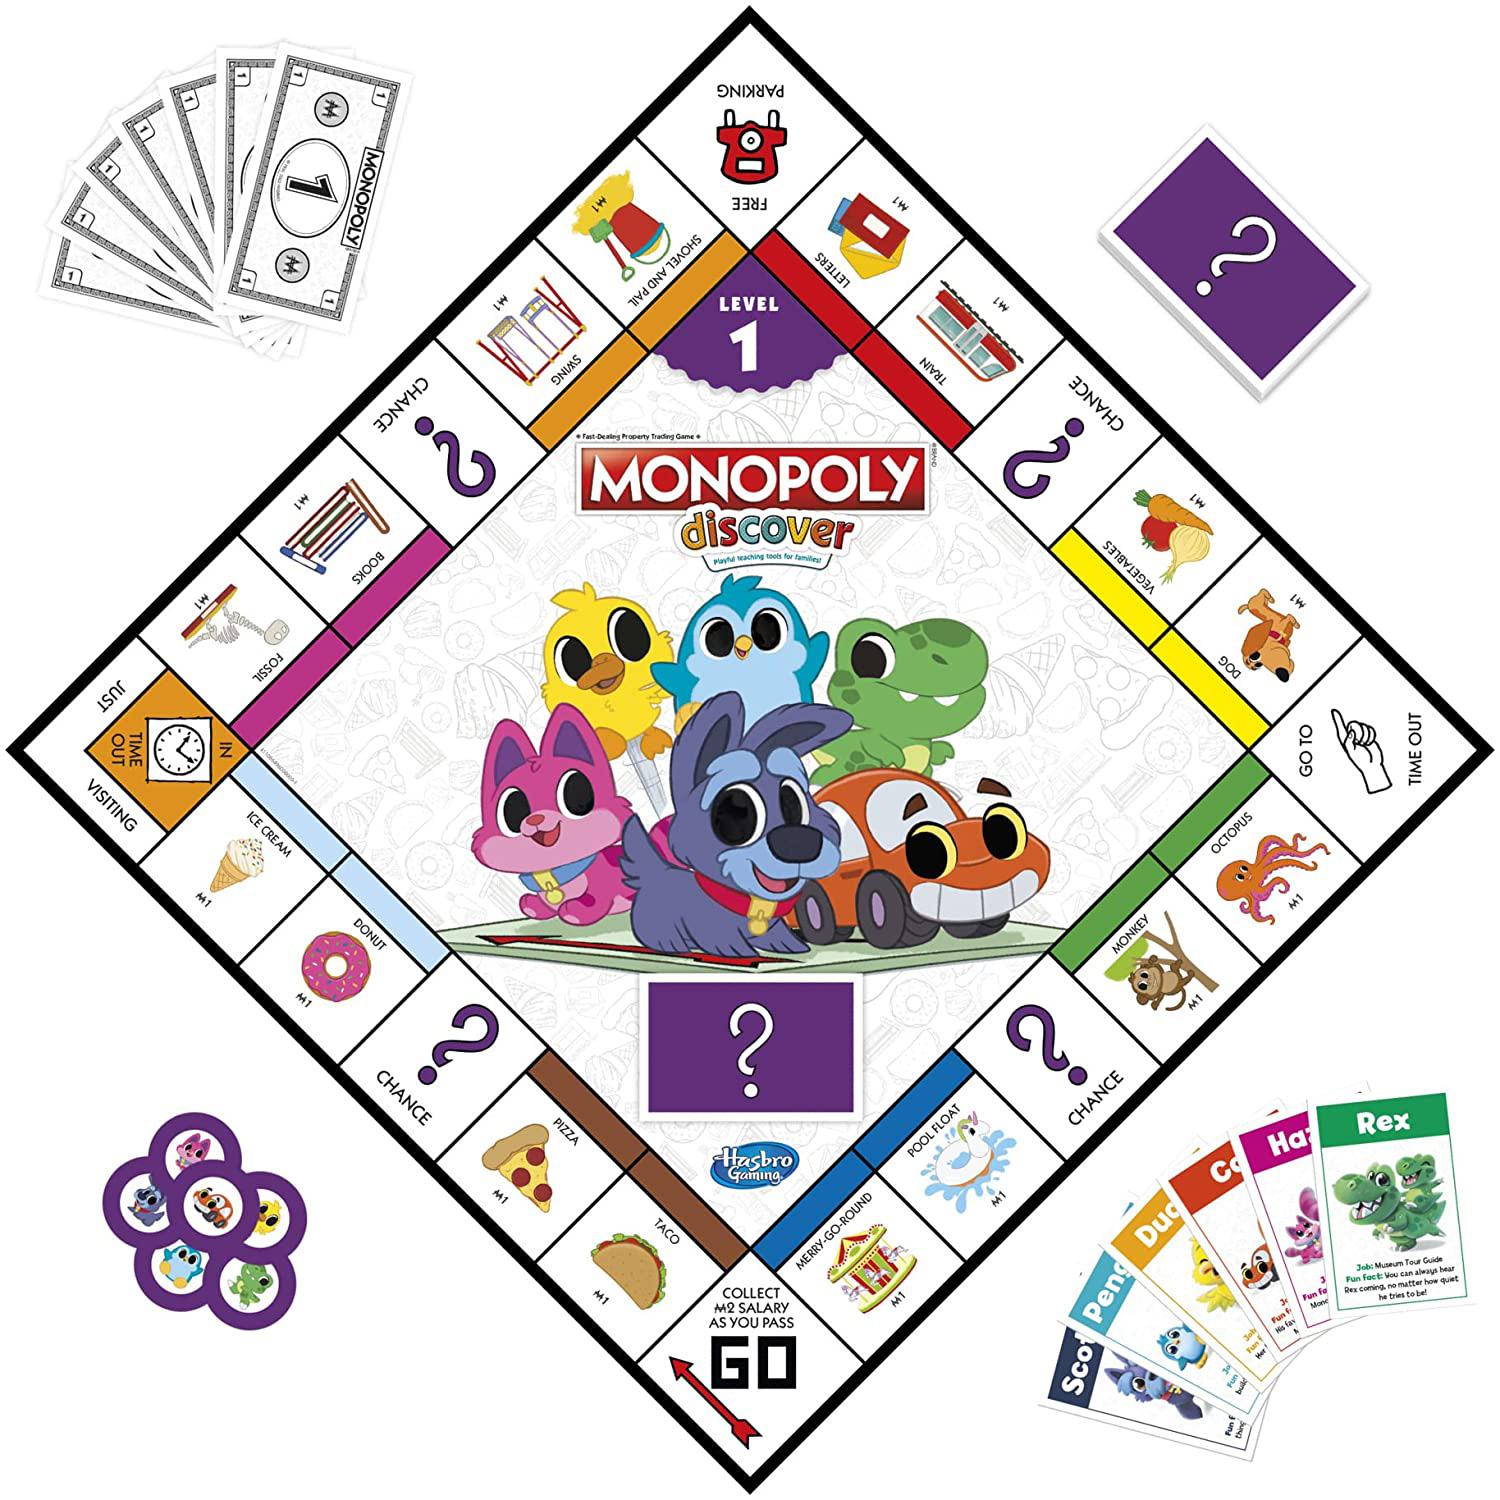 monopoly discover rules